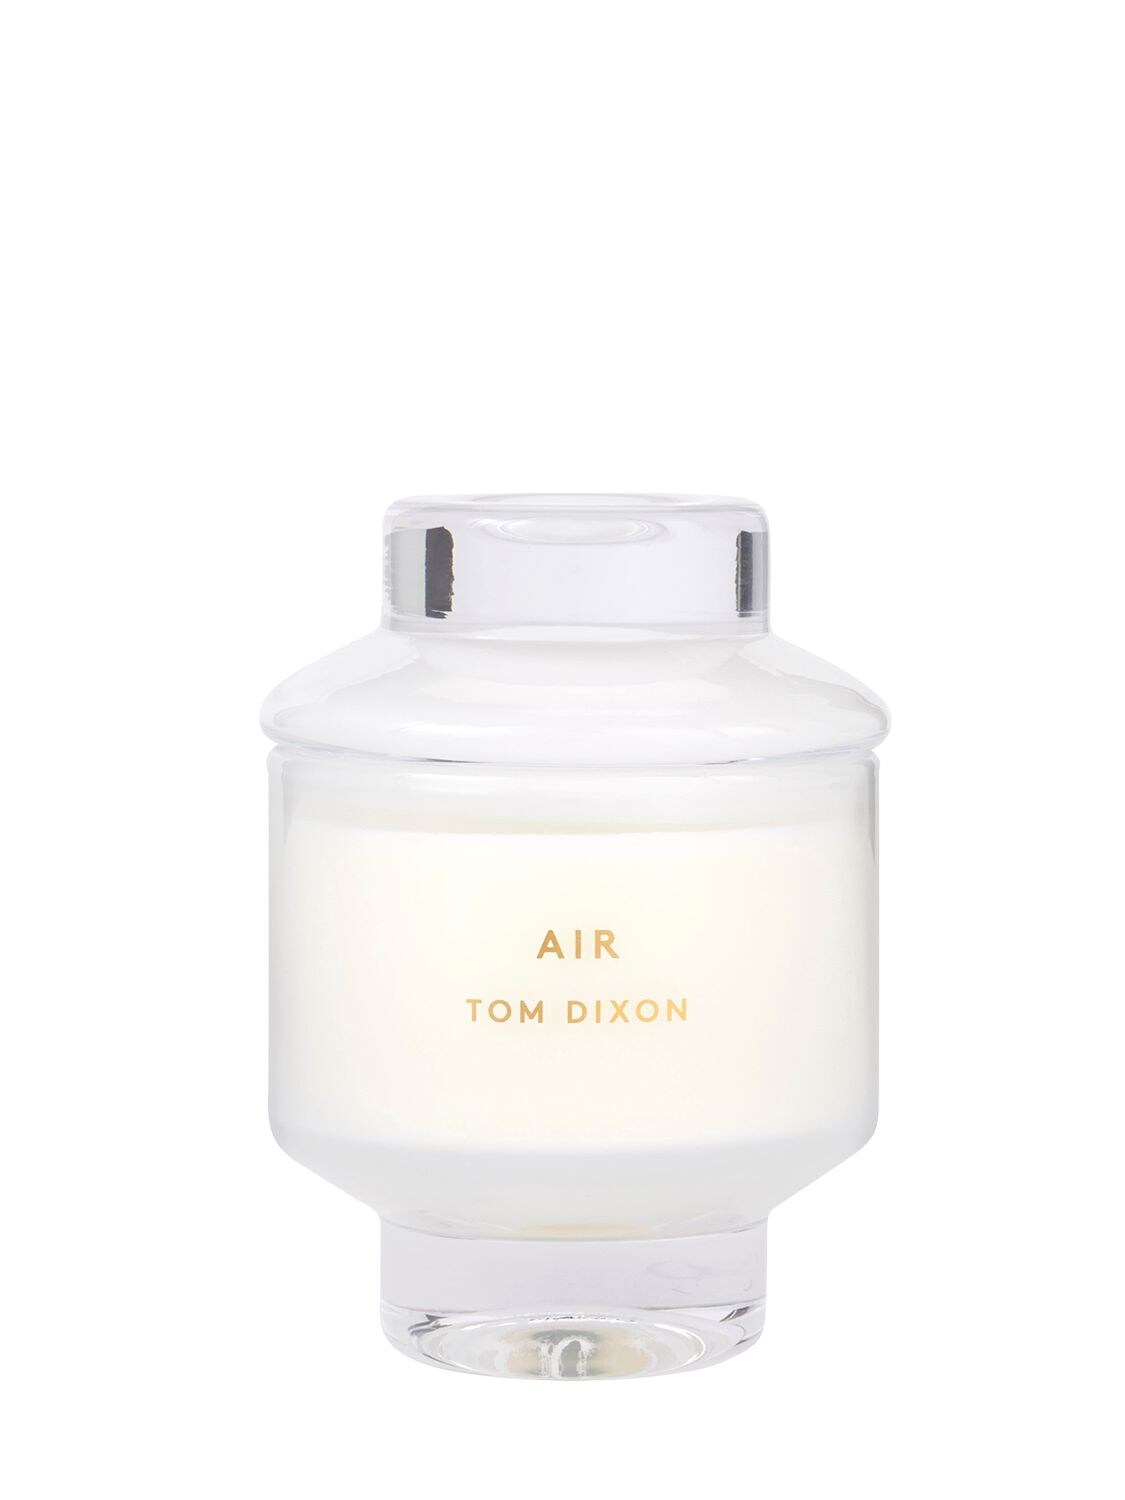 Tom Dixon Air - Scented Candle In White